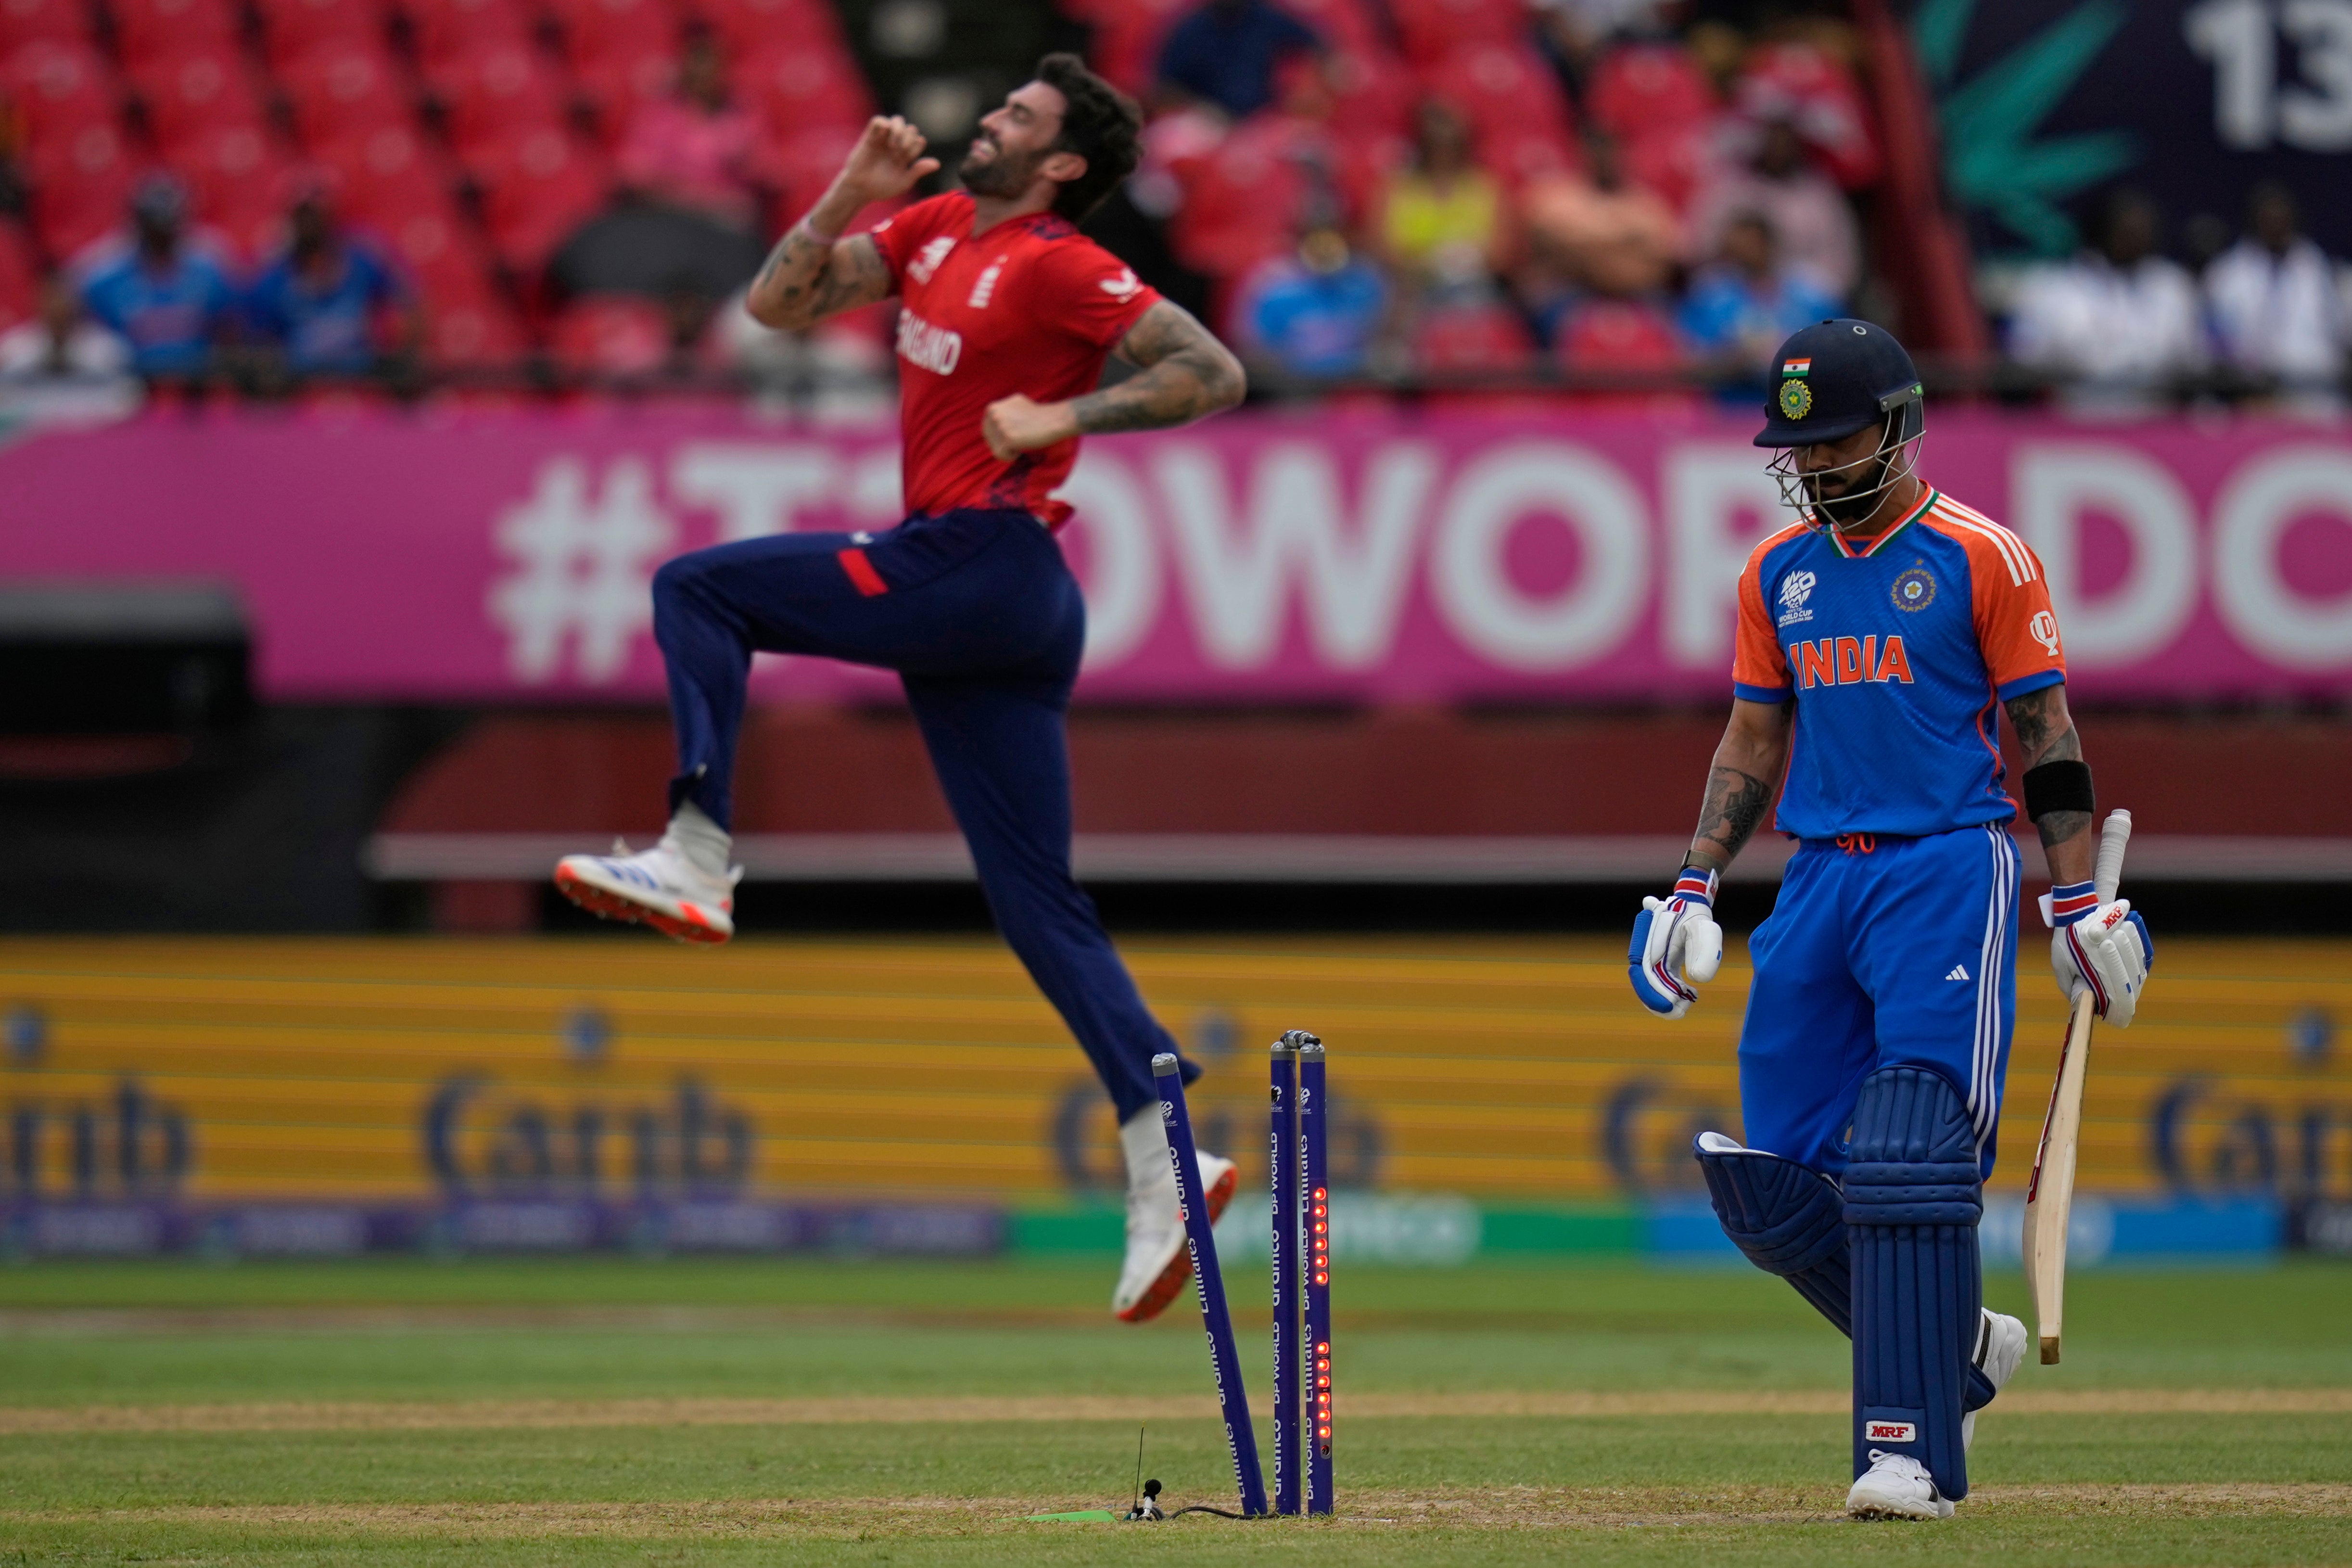 pa ready, england, india, jos buttler, virat kohli, caribbean, matthew mott, adelaide, west indies, english, moeen ali, oman, united states, namibia, south africa, australia, jonny bairstow, jos buttler promises england white-ball review after dismal t20 world cup exit